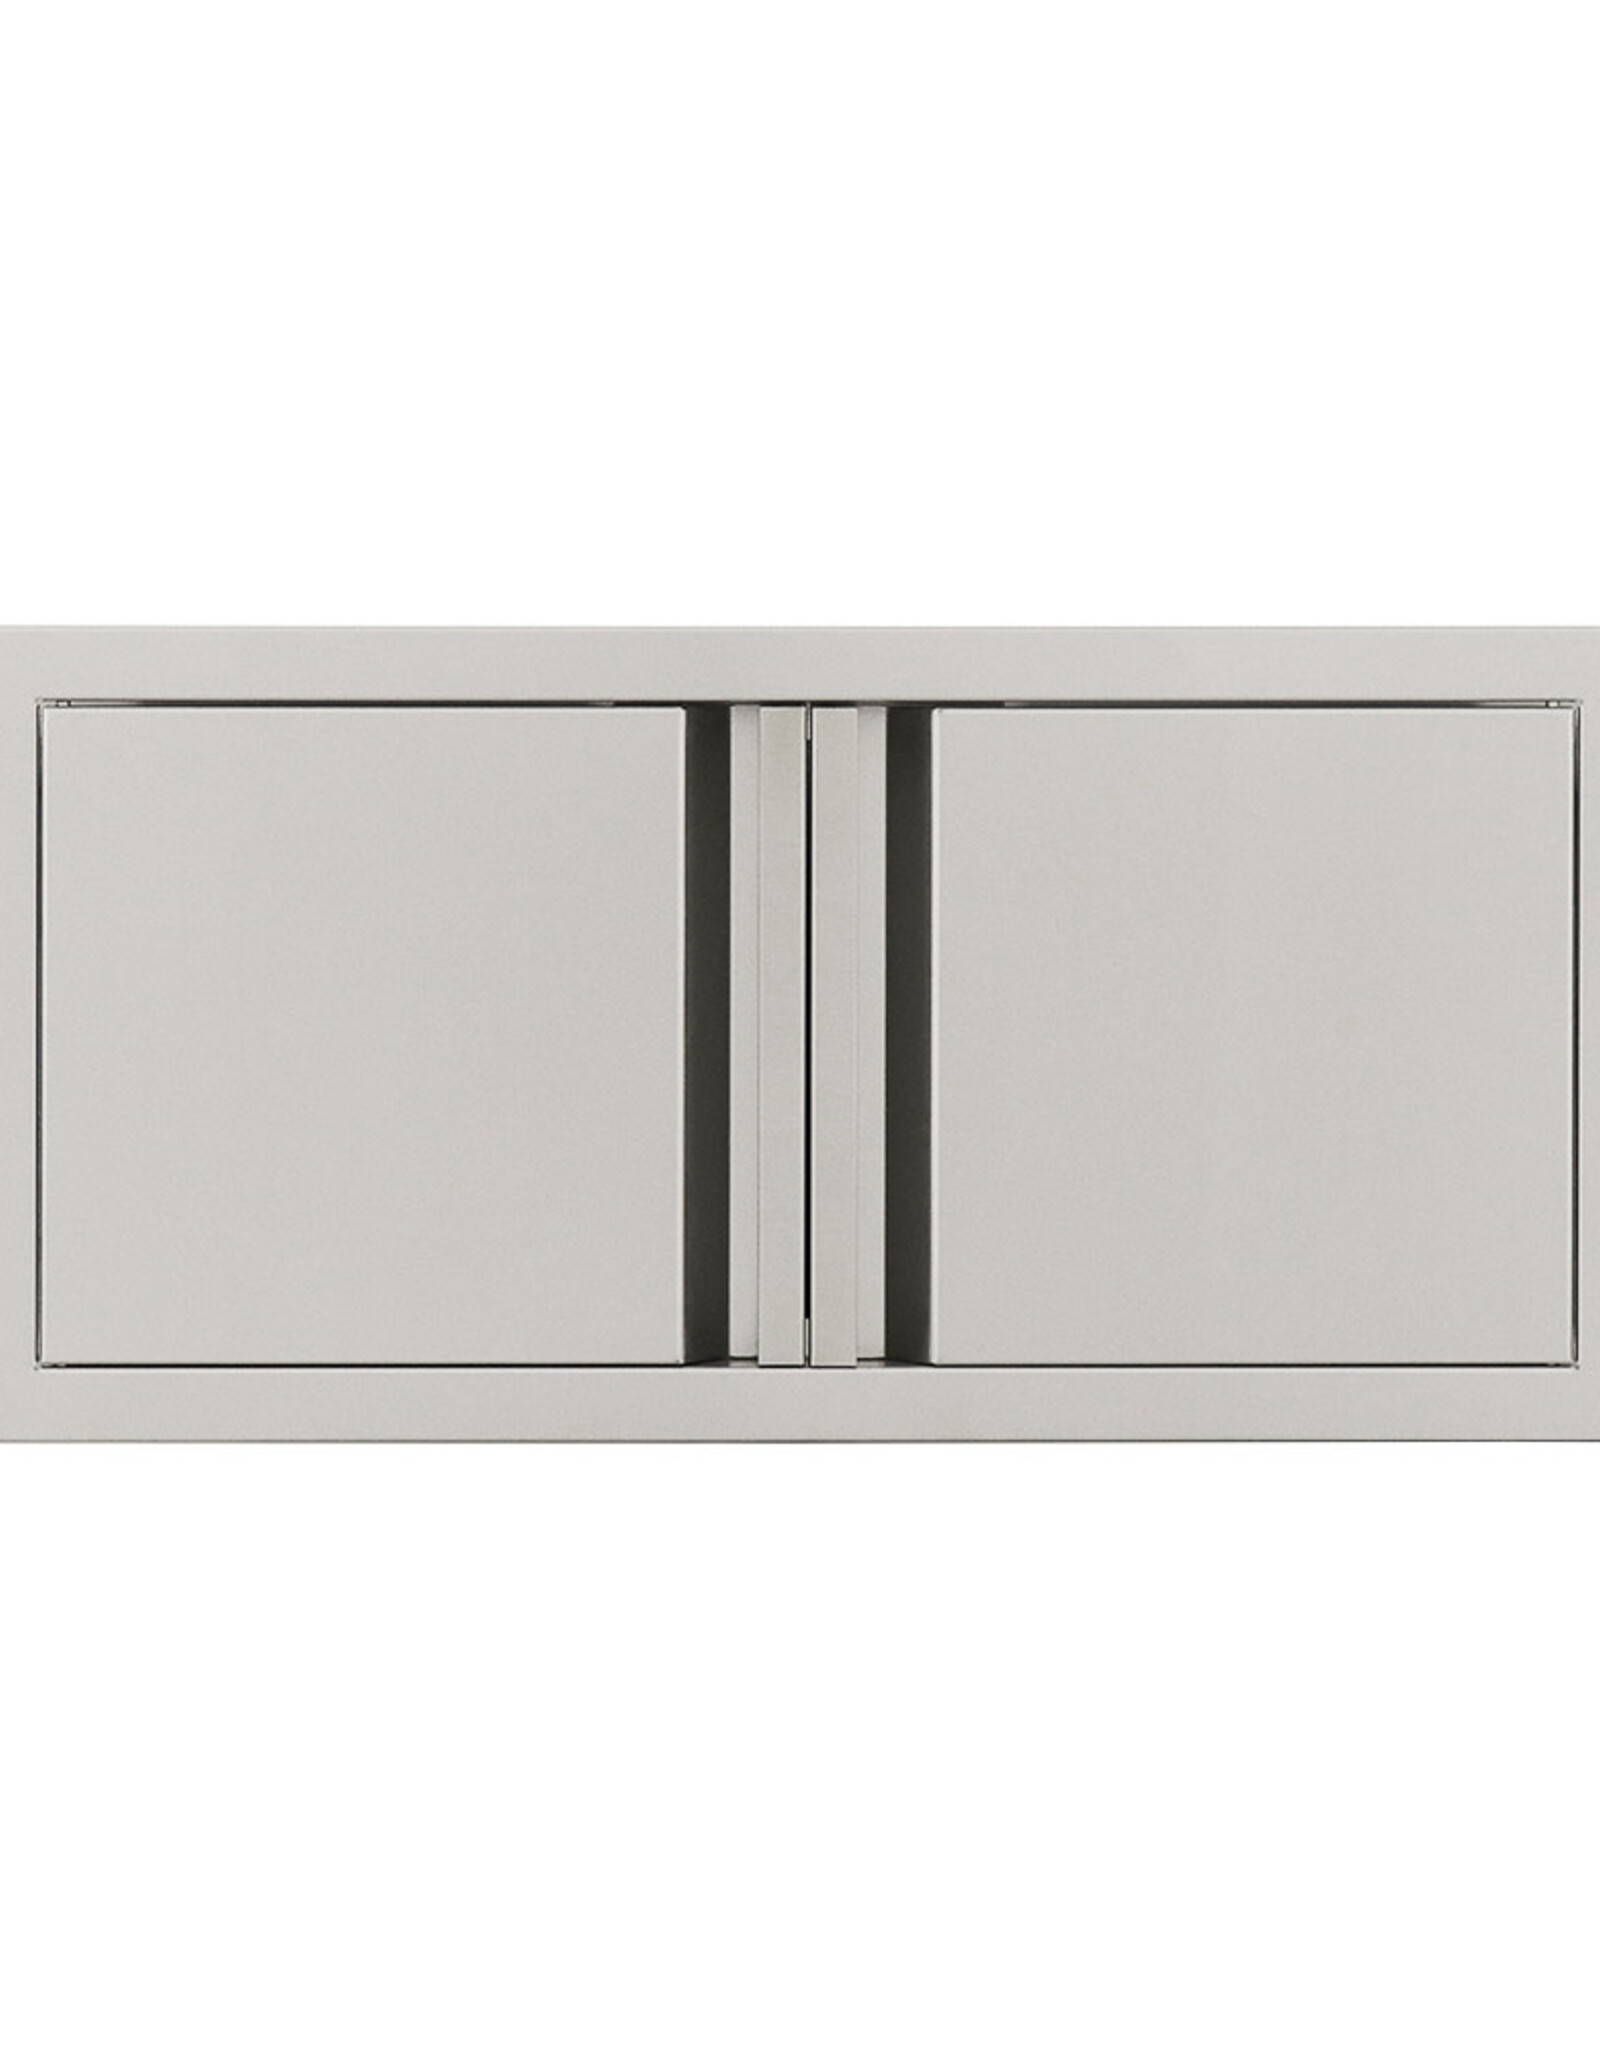 Renaissance Cooking Systems Renaissance Cooking Systems Lower Profile Double Door - VDD3